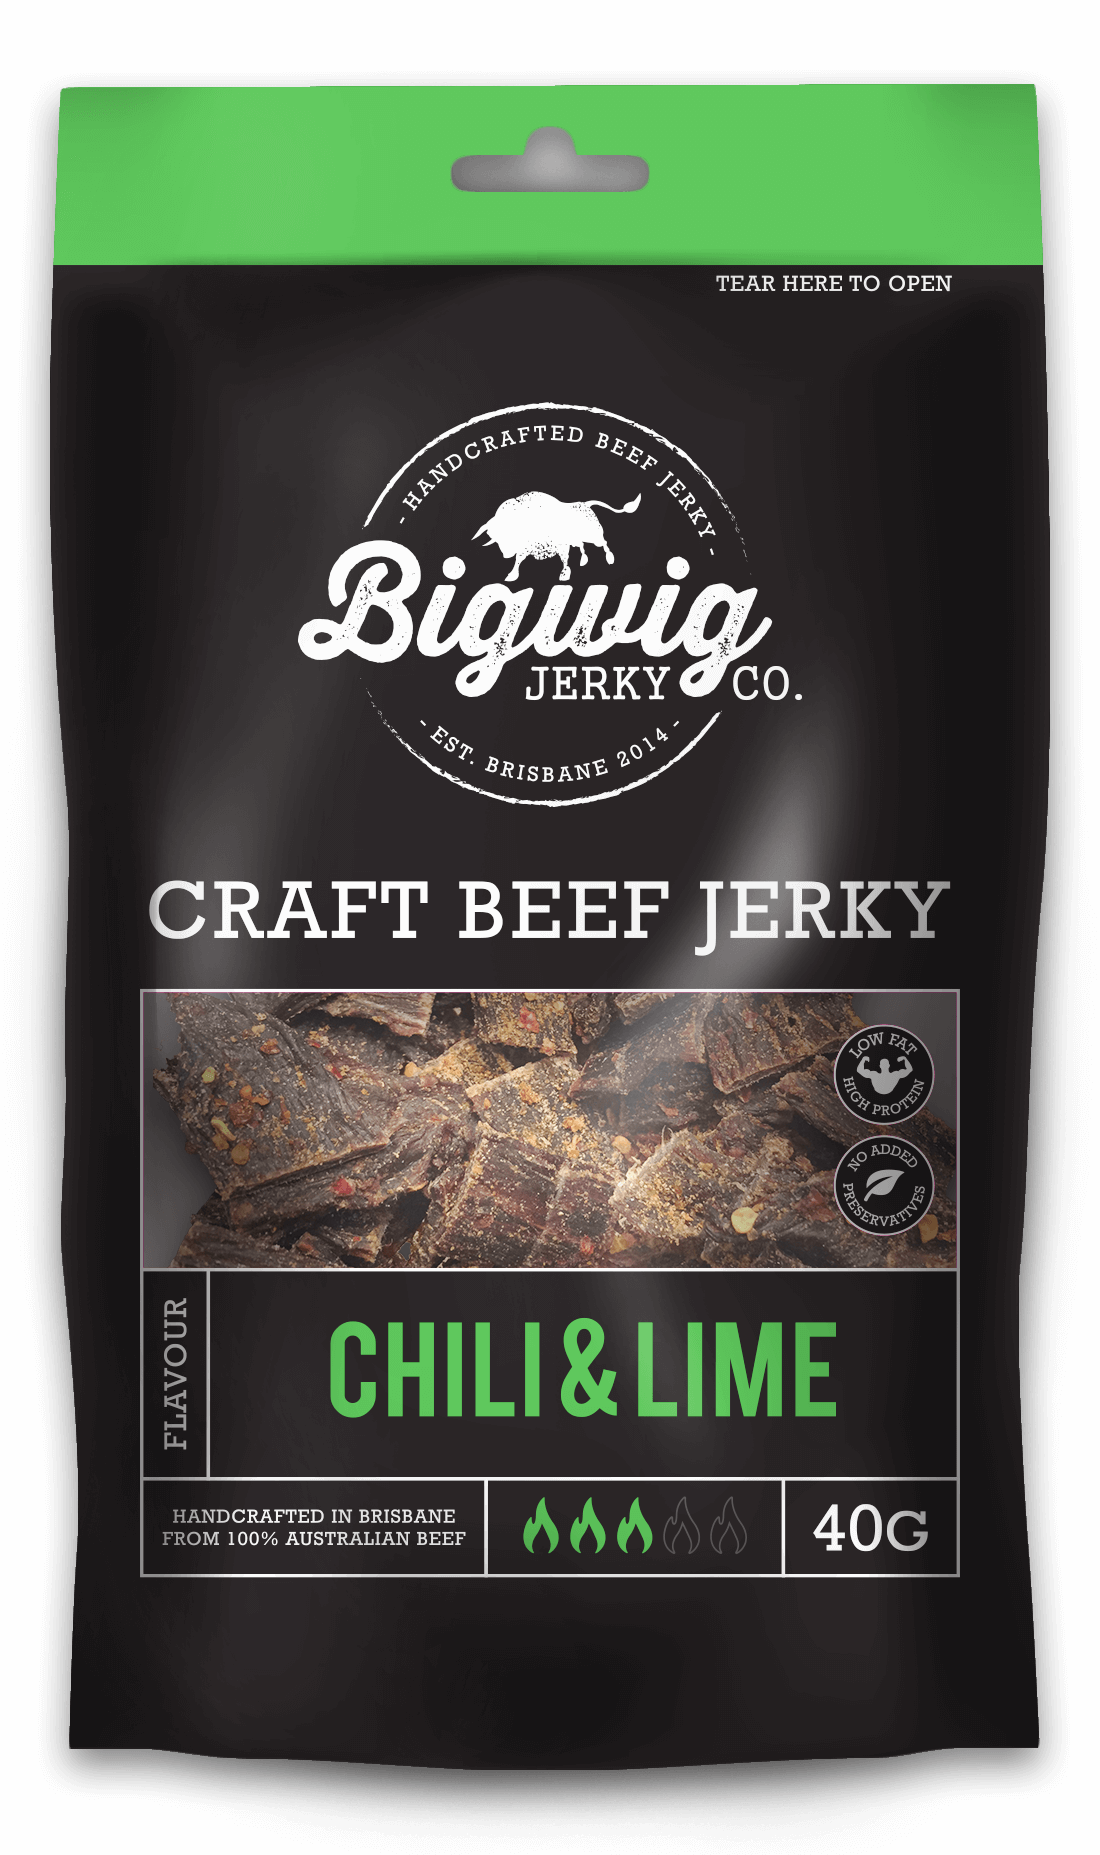 Chili & Lime Beef Jerky